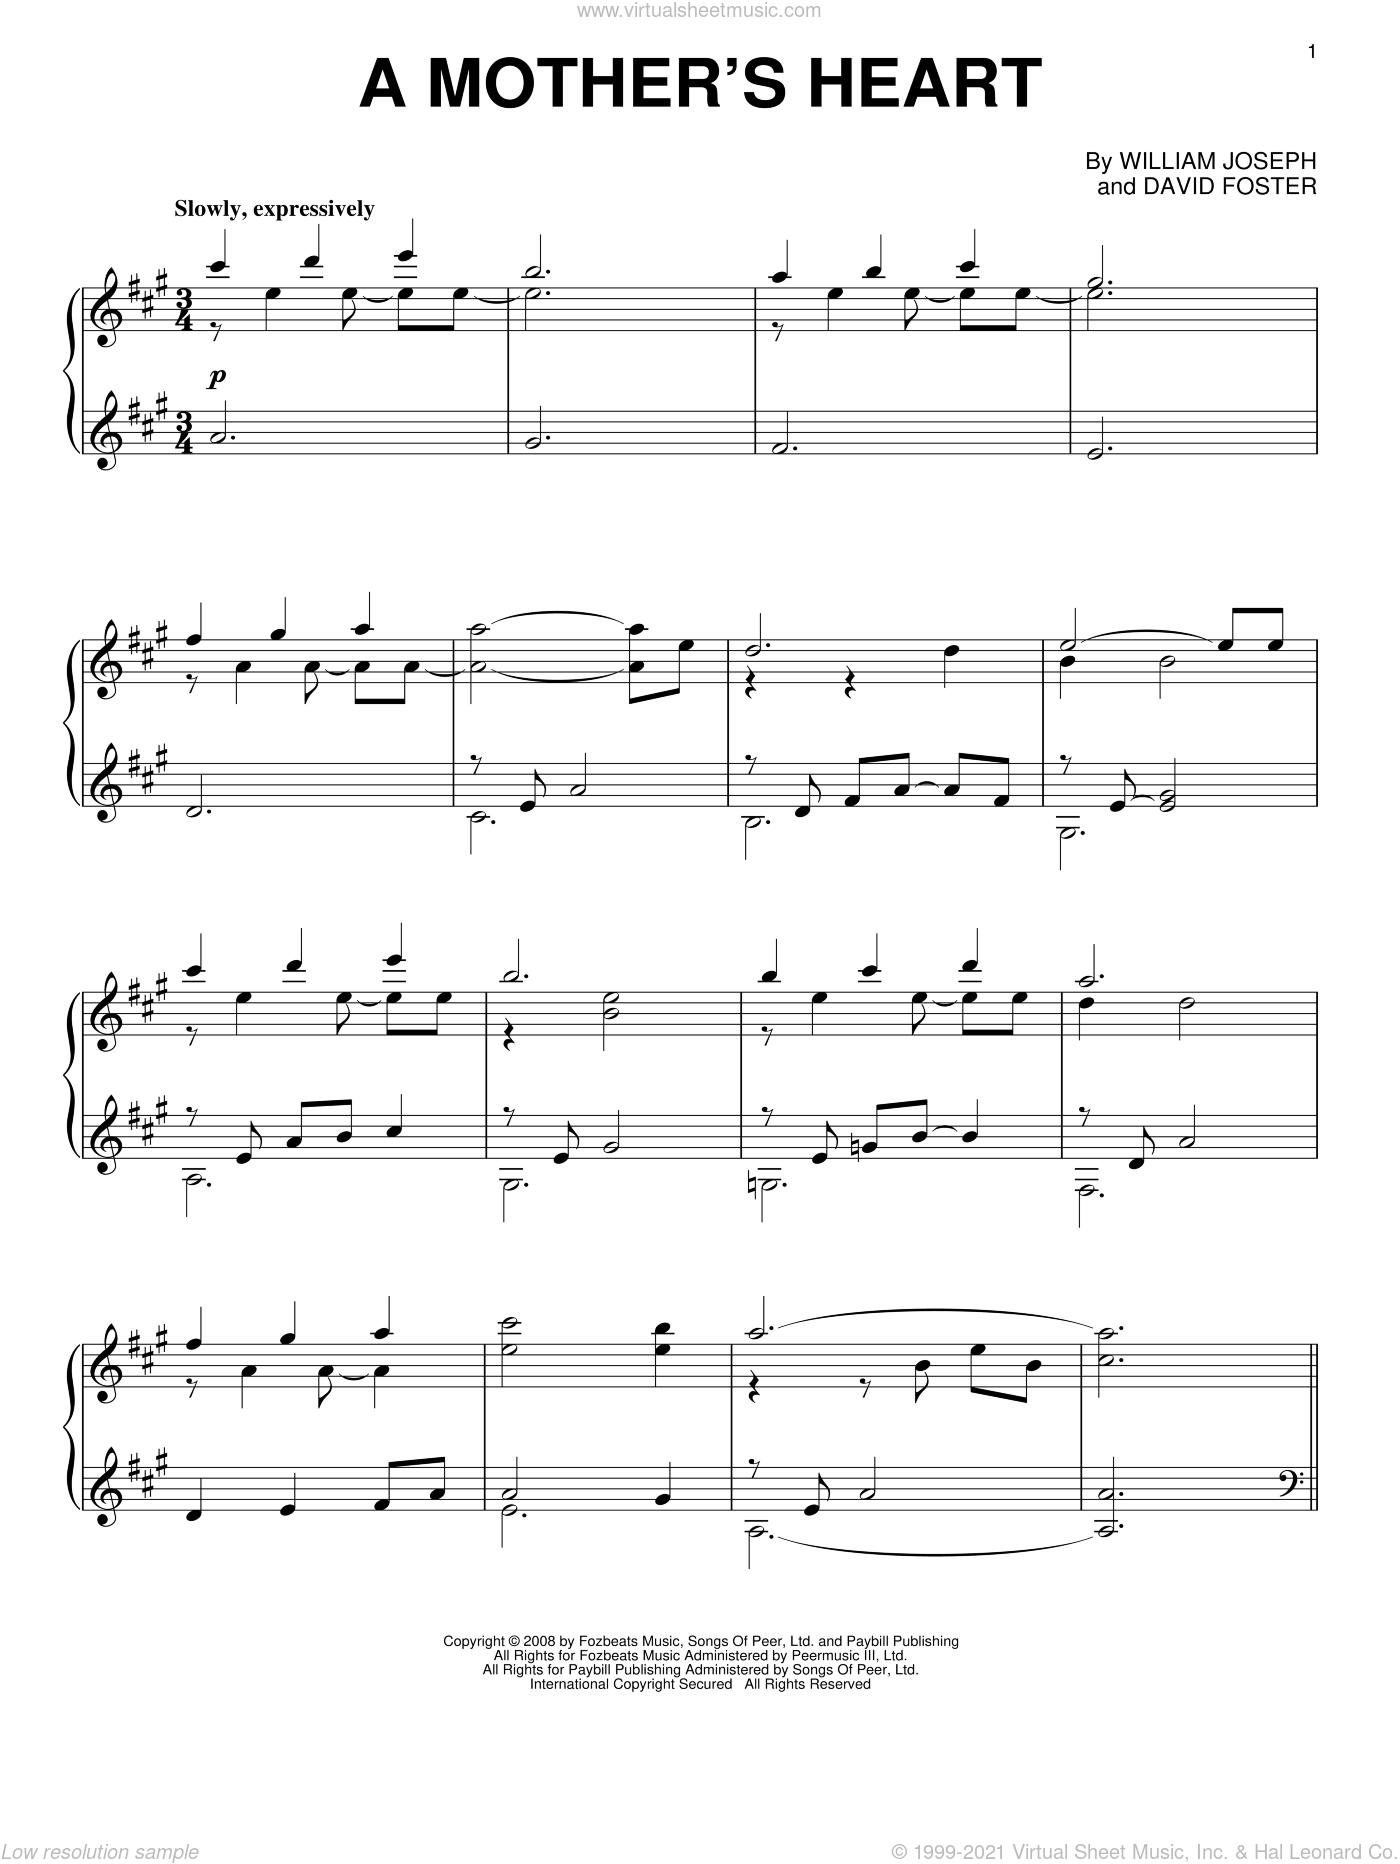 Paper Hearts (no friend to play with version) Sheet music for Piano (Solo)